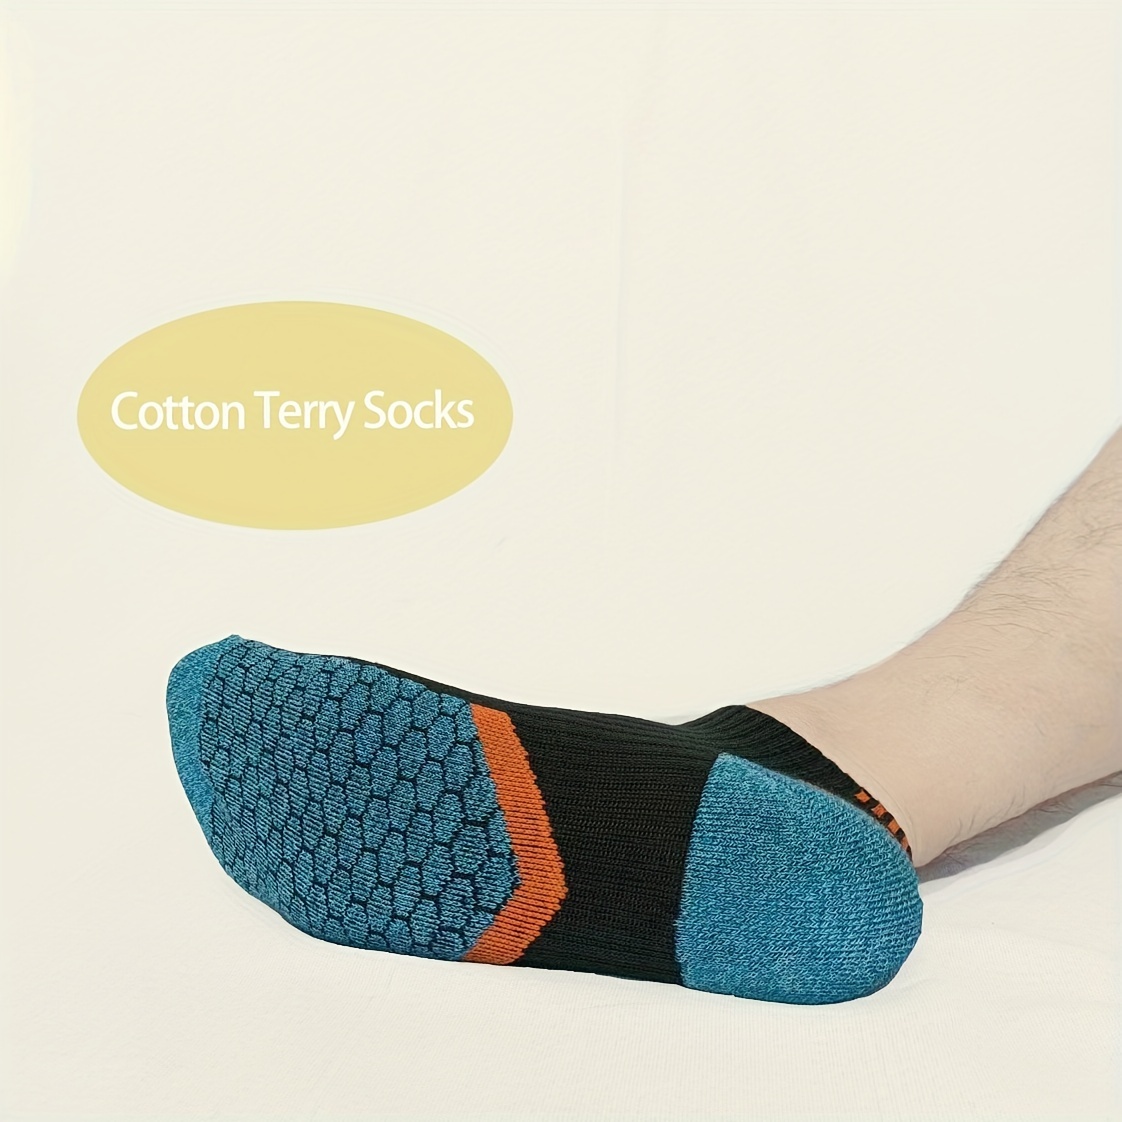 SPORT SOCKS WITH COTTON AND TERRY. 3 PAIRS